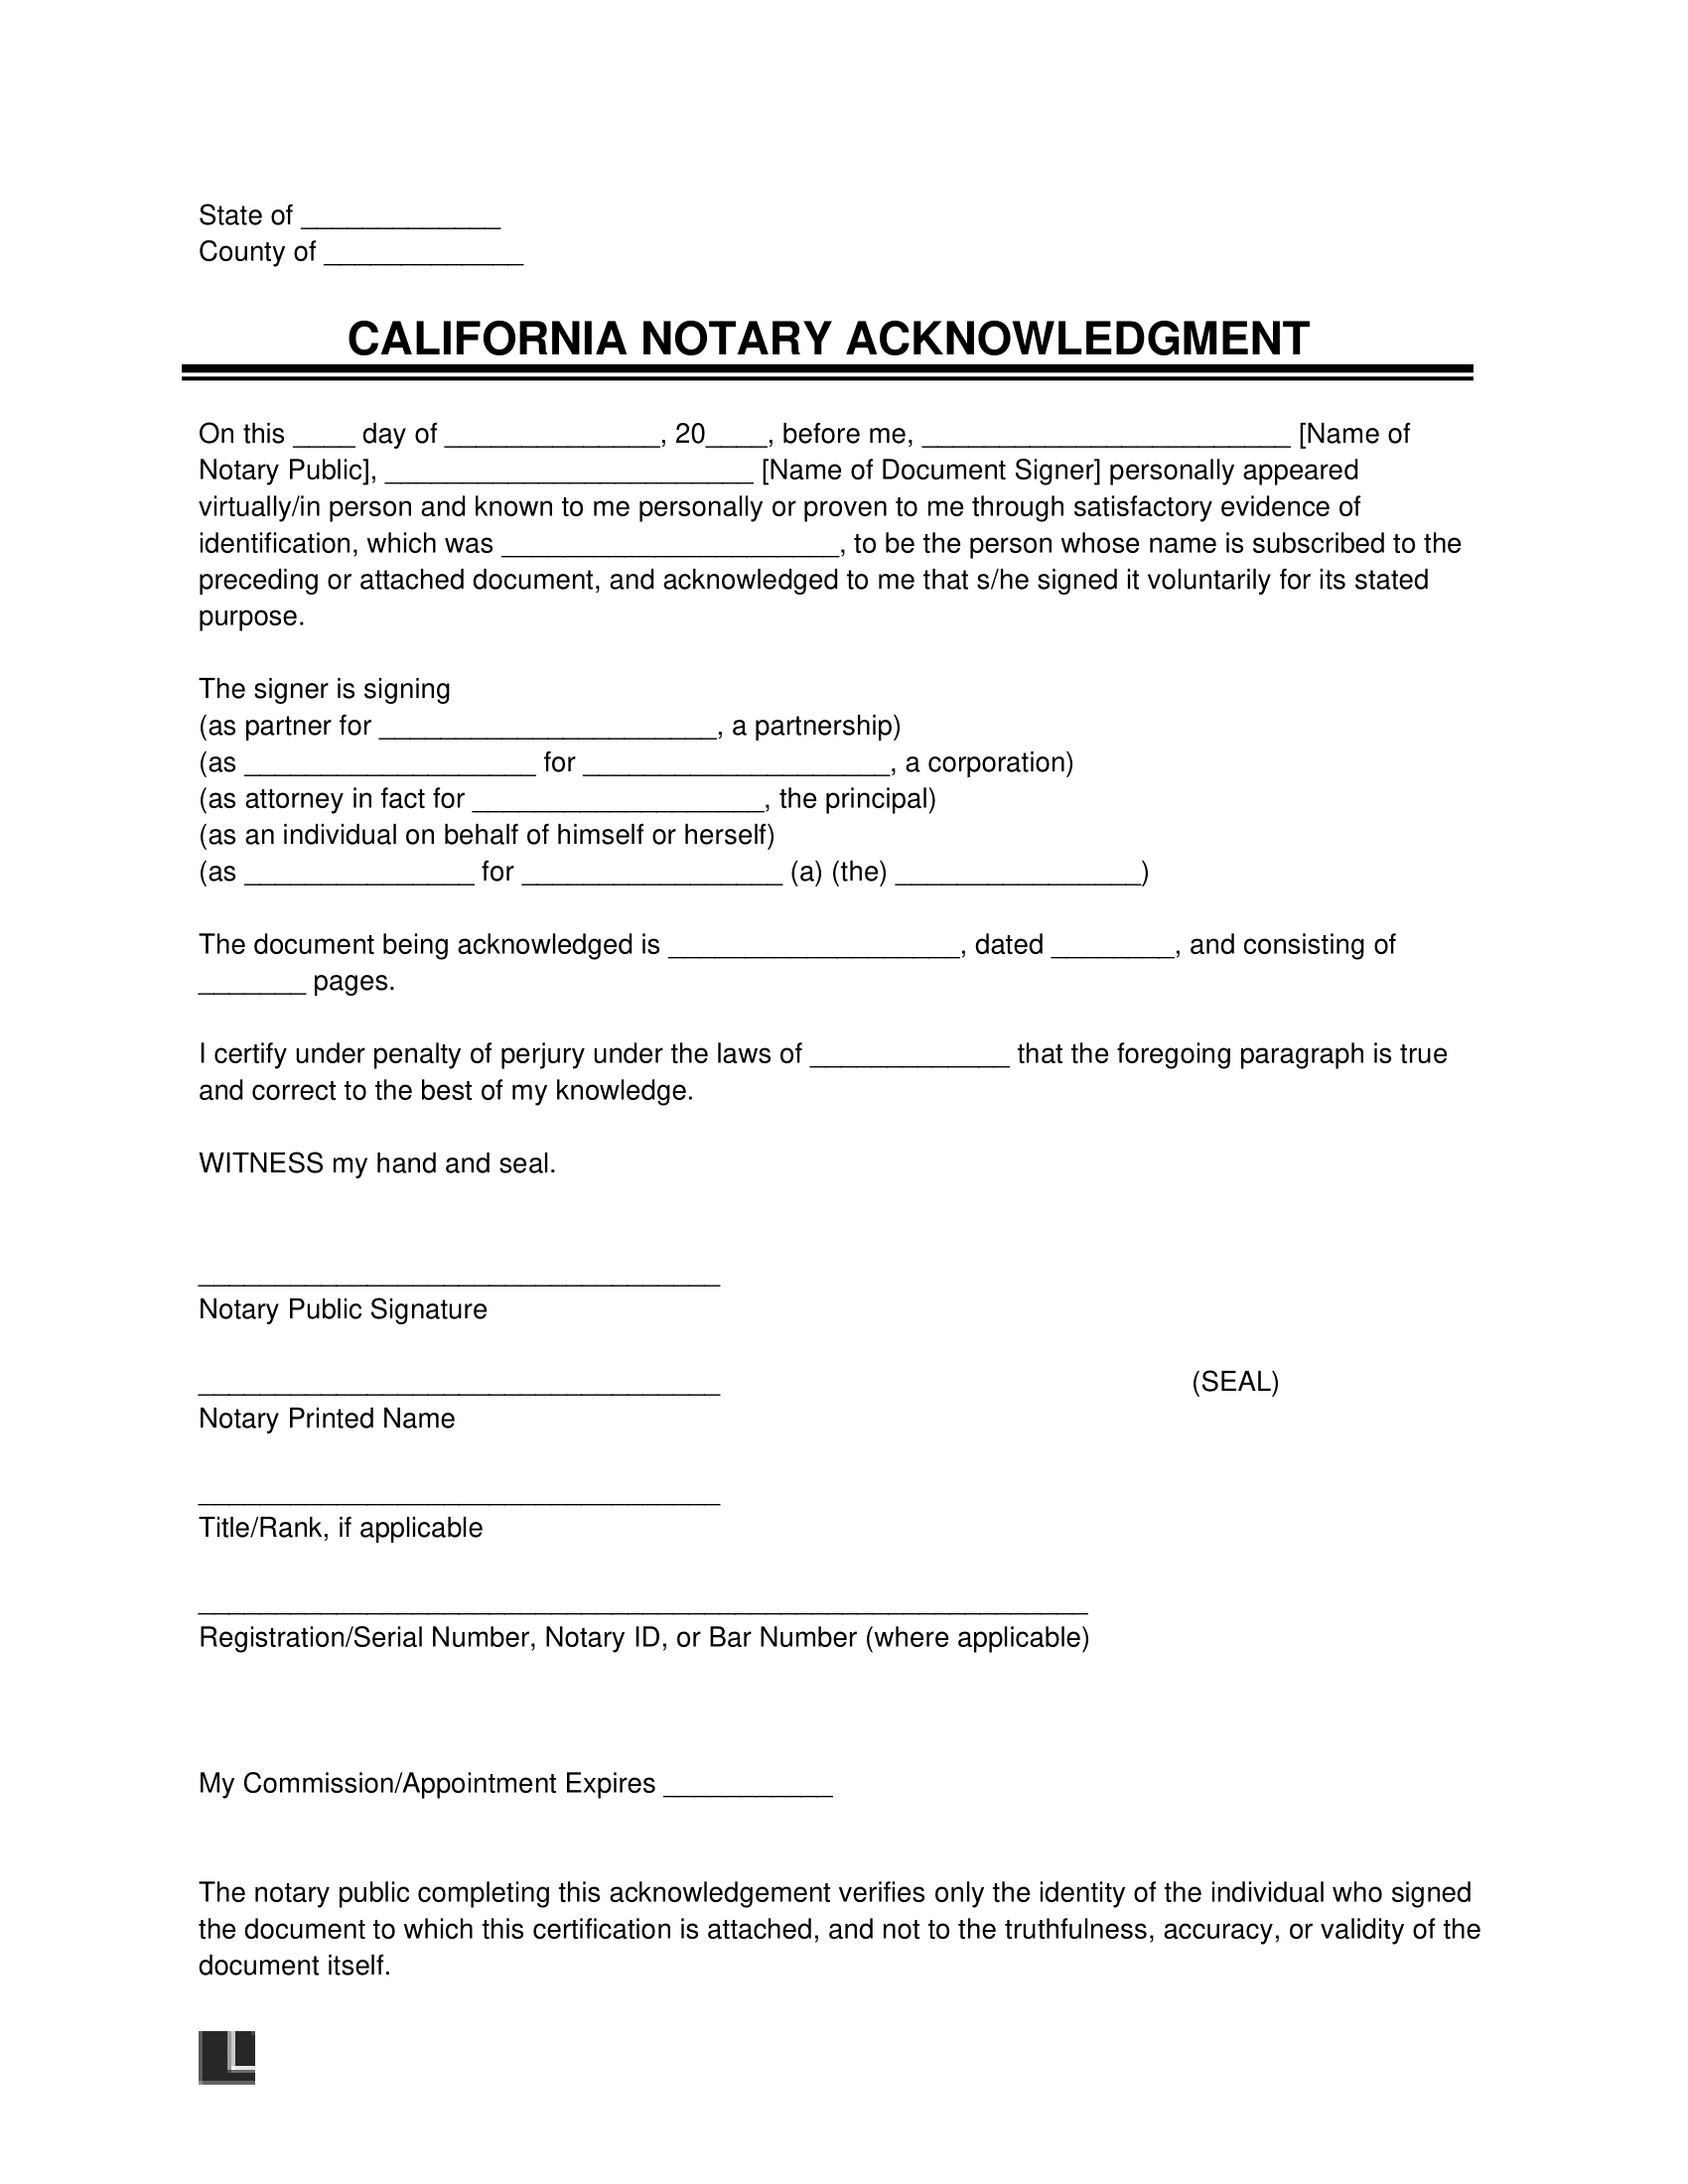 California Notary Acknowledgment Form